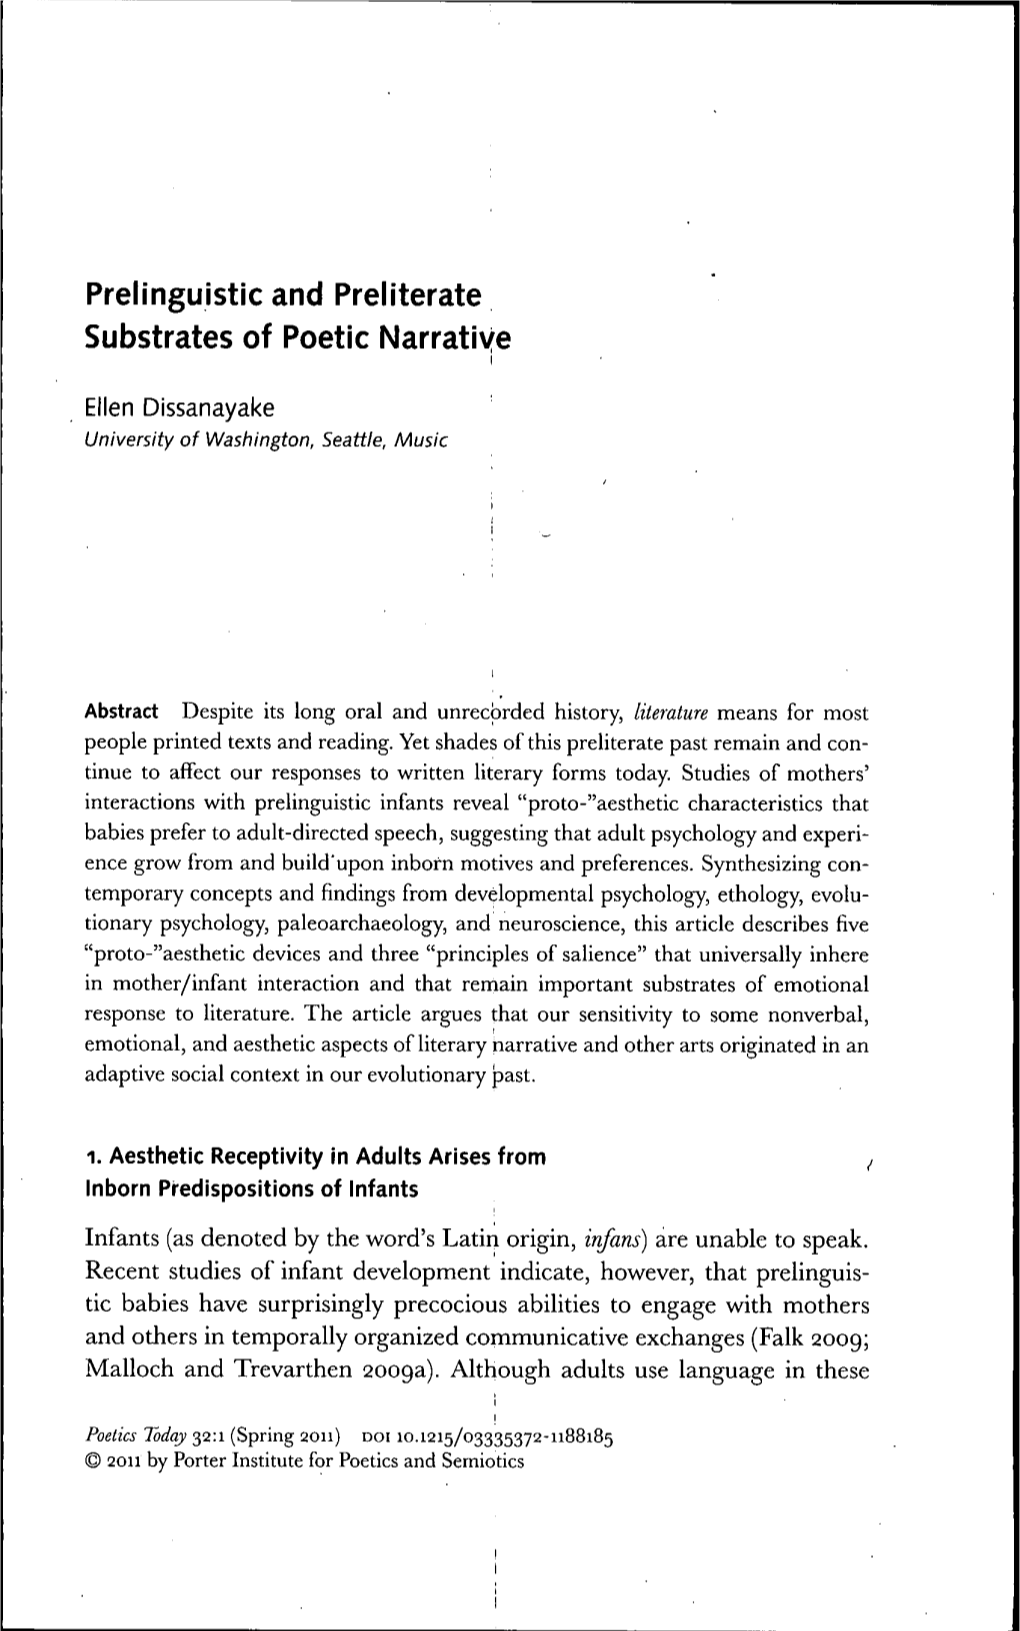 Prelinguistic and Preliterate Substrates of Poetic Narrative